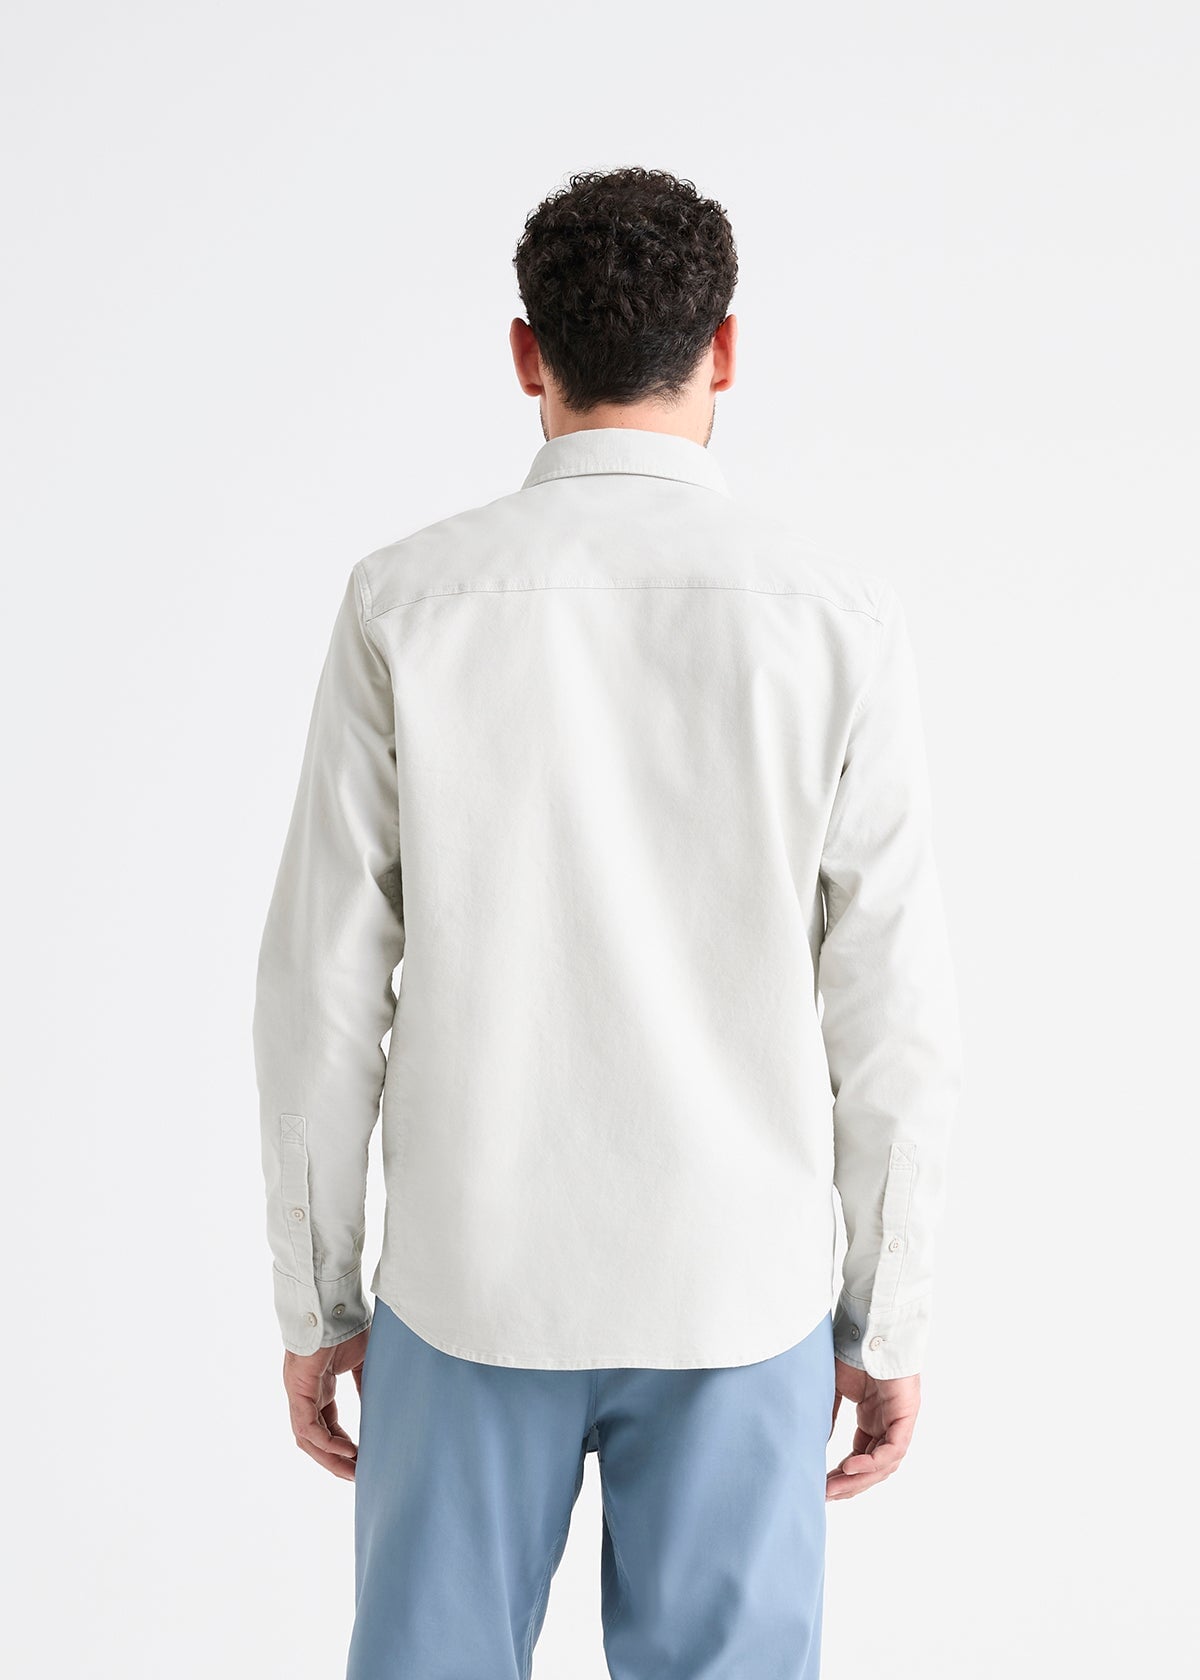 mens off-white stretch button down shirt back